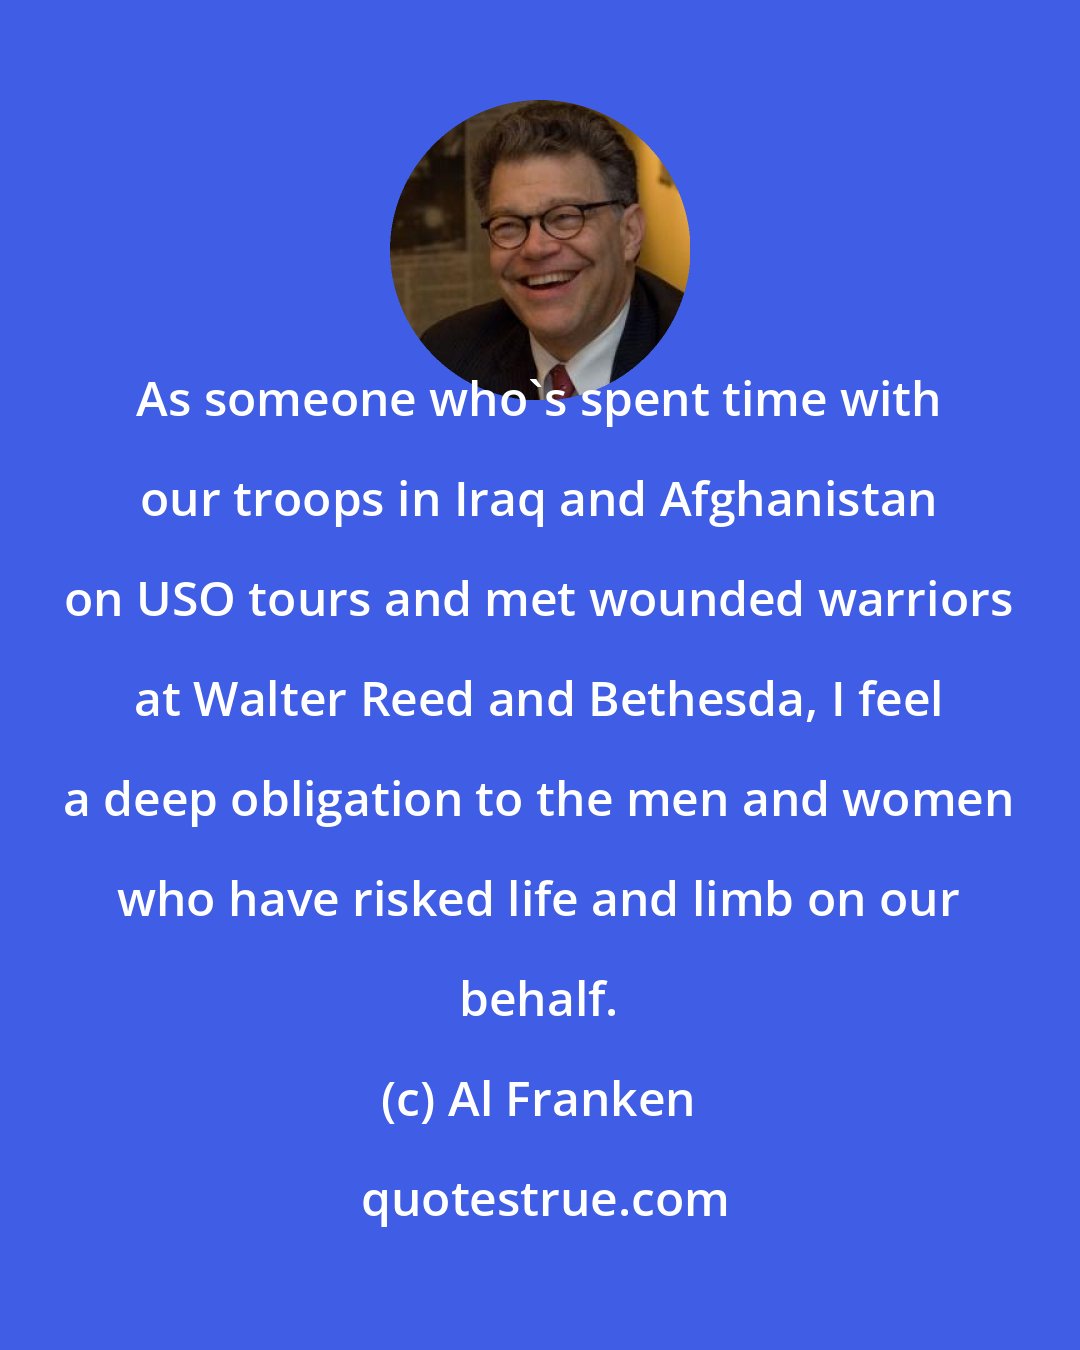 Al Franken: As someone who's spent time with our troops in Iraq and Afghanistan on USO tours and met wounded warriors at Walter Reed and Bethesda, I feel a deep obligation to the men and women who have risked life and limb on our behalf.